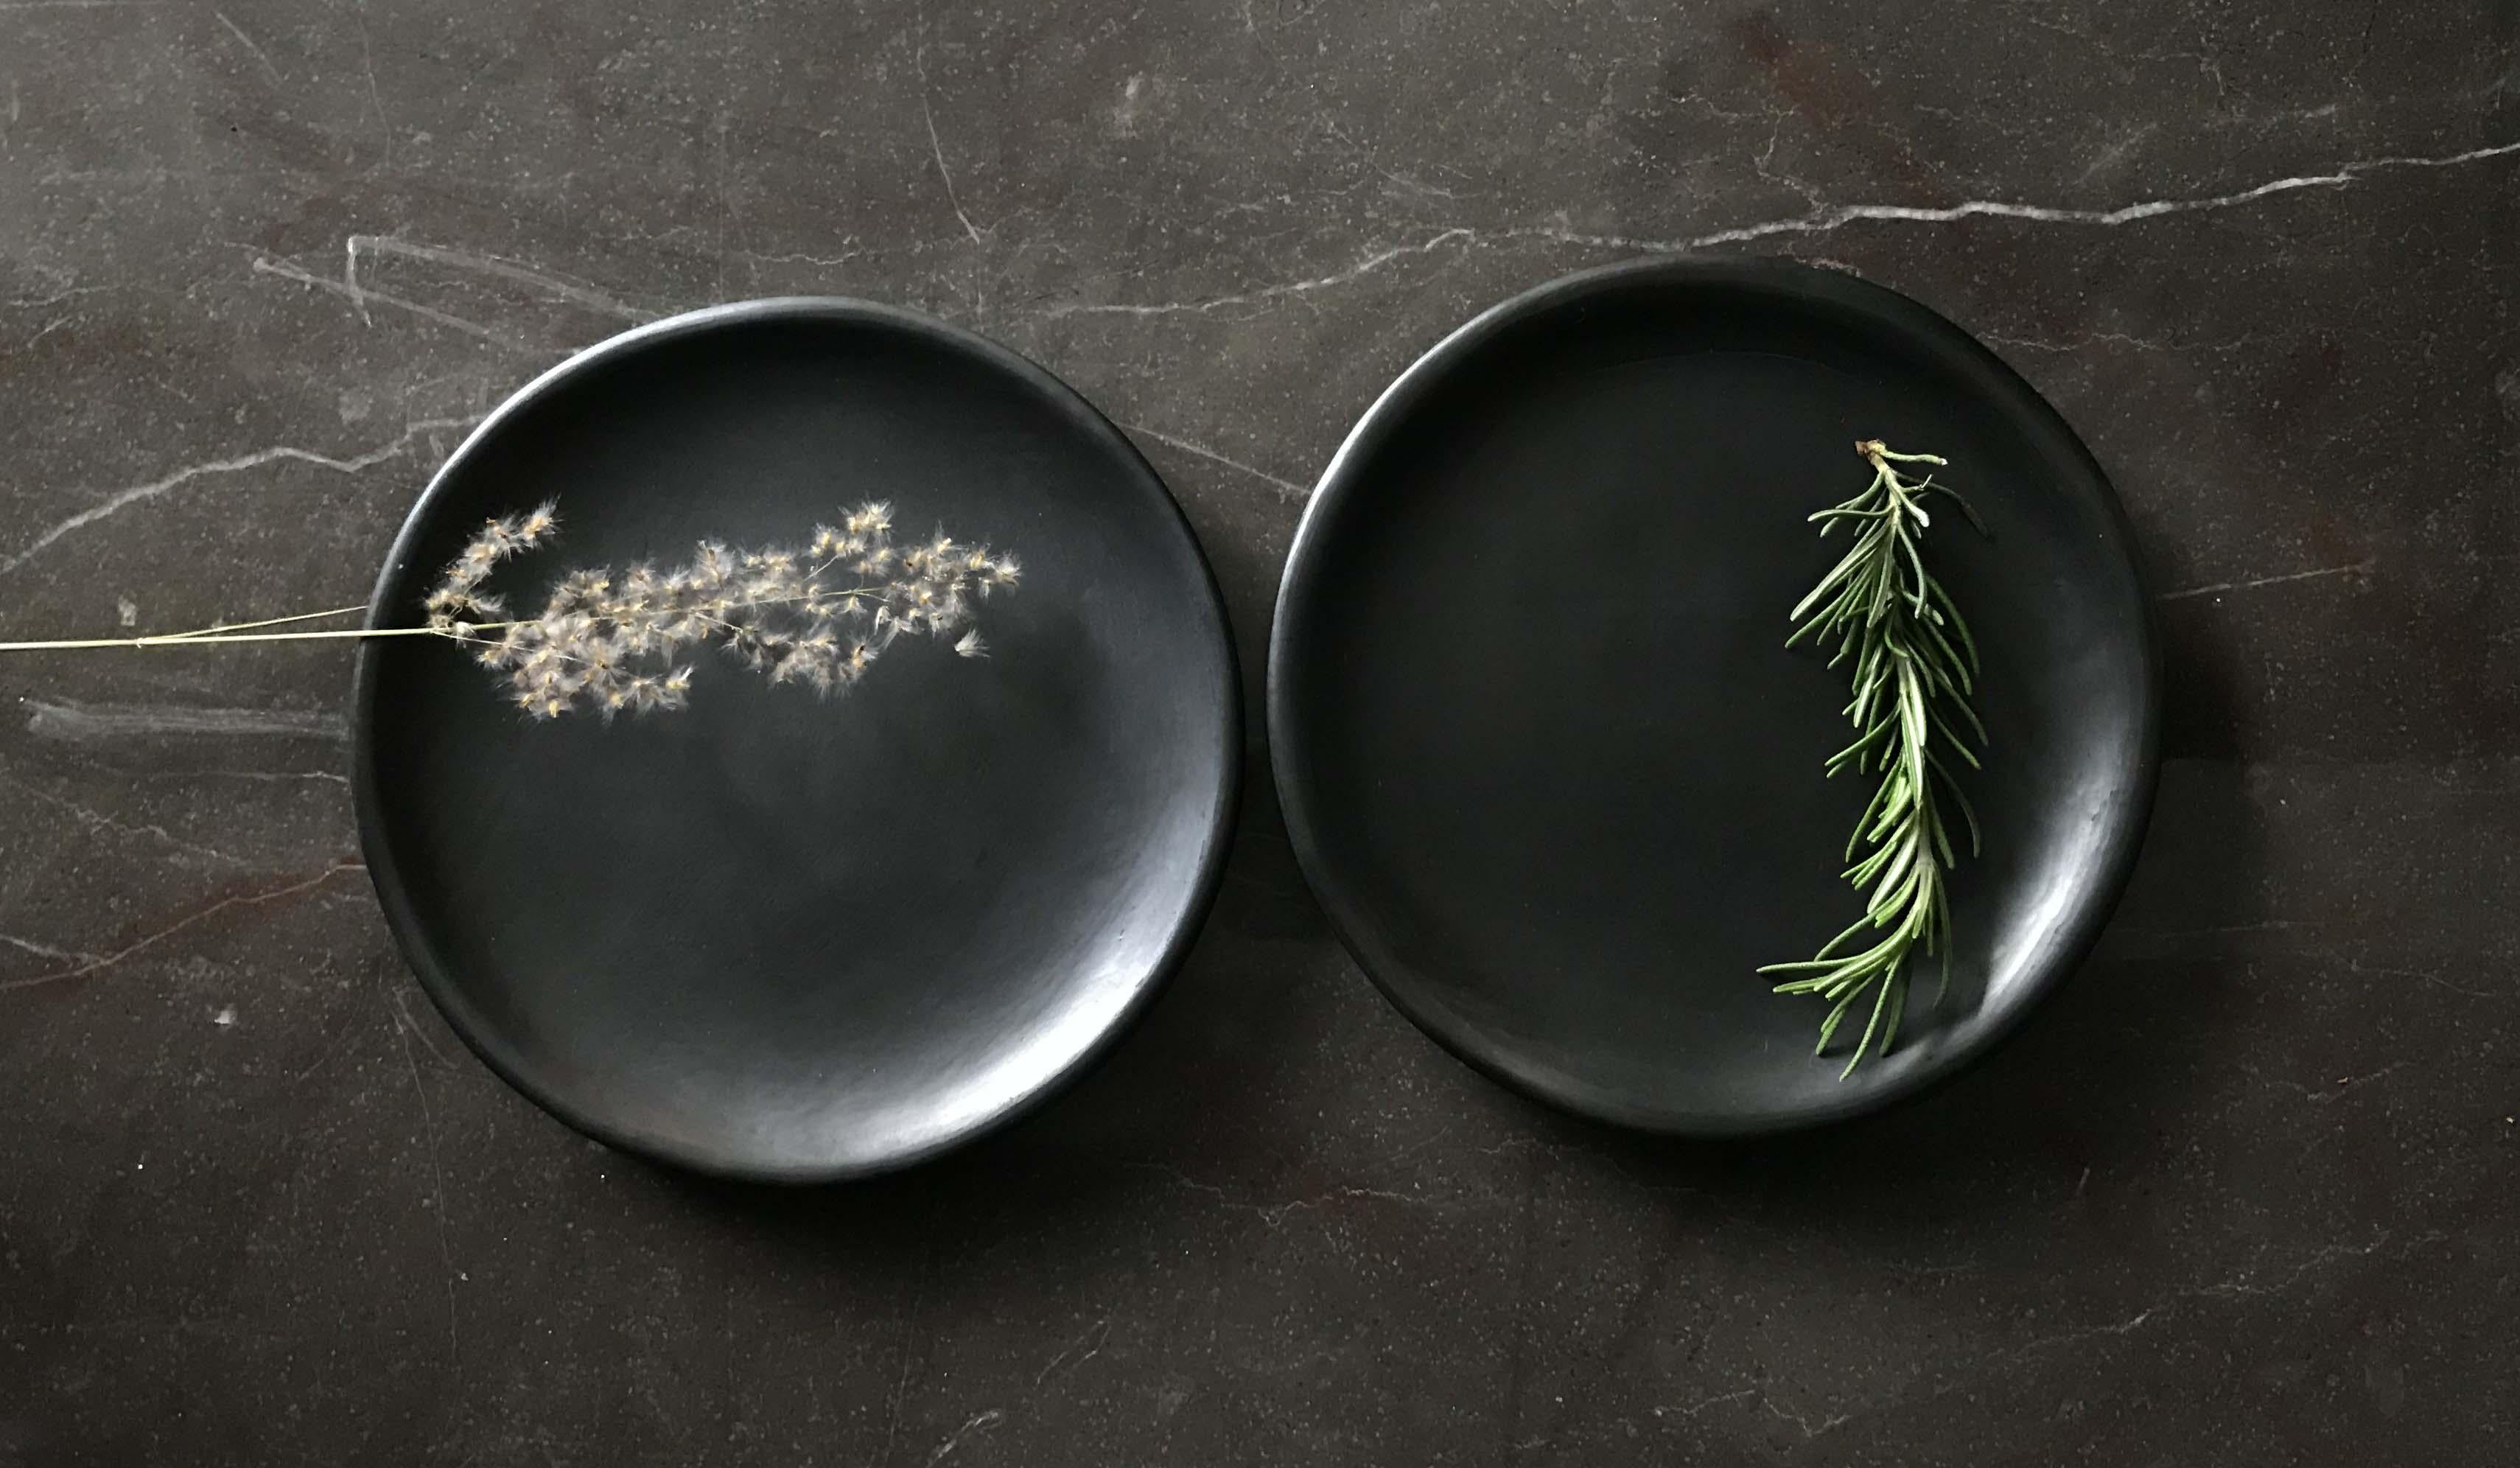 Oaxacan black clay 15cm plates handmade tableware burnished barro negro Oaxaca. Set of 8 pieces 

The soft and rich color makes this side plate a stylish partner to bread, butter or more spectacular starters.

Handmade in Oaxaca, a state rich in